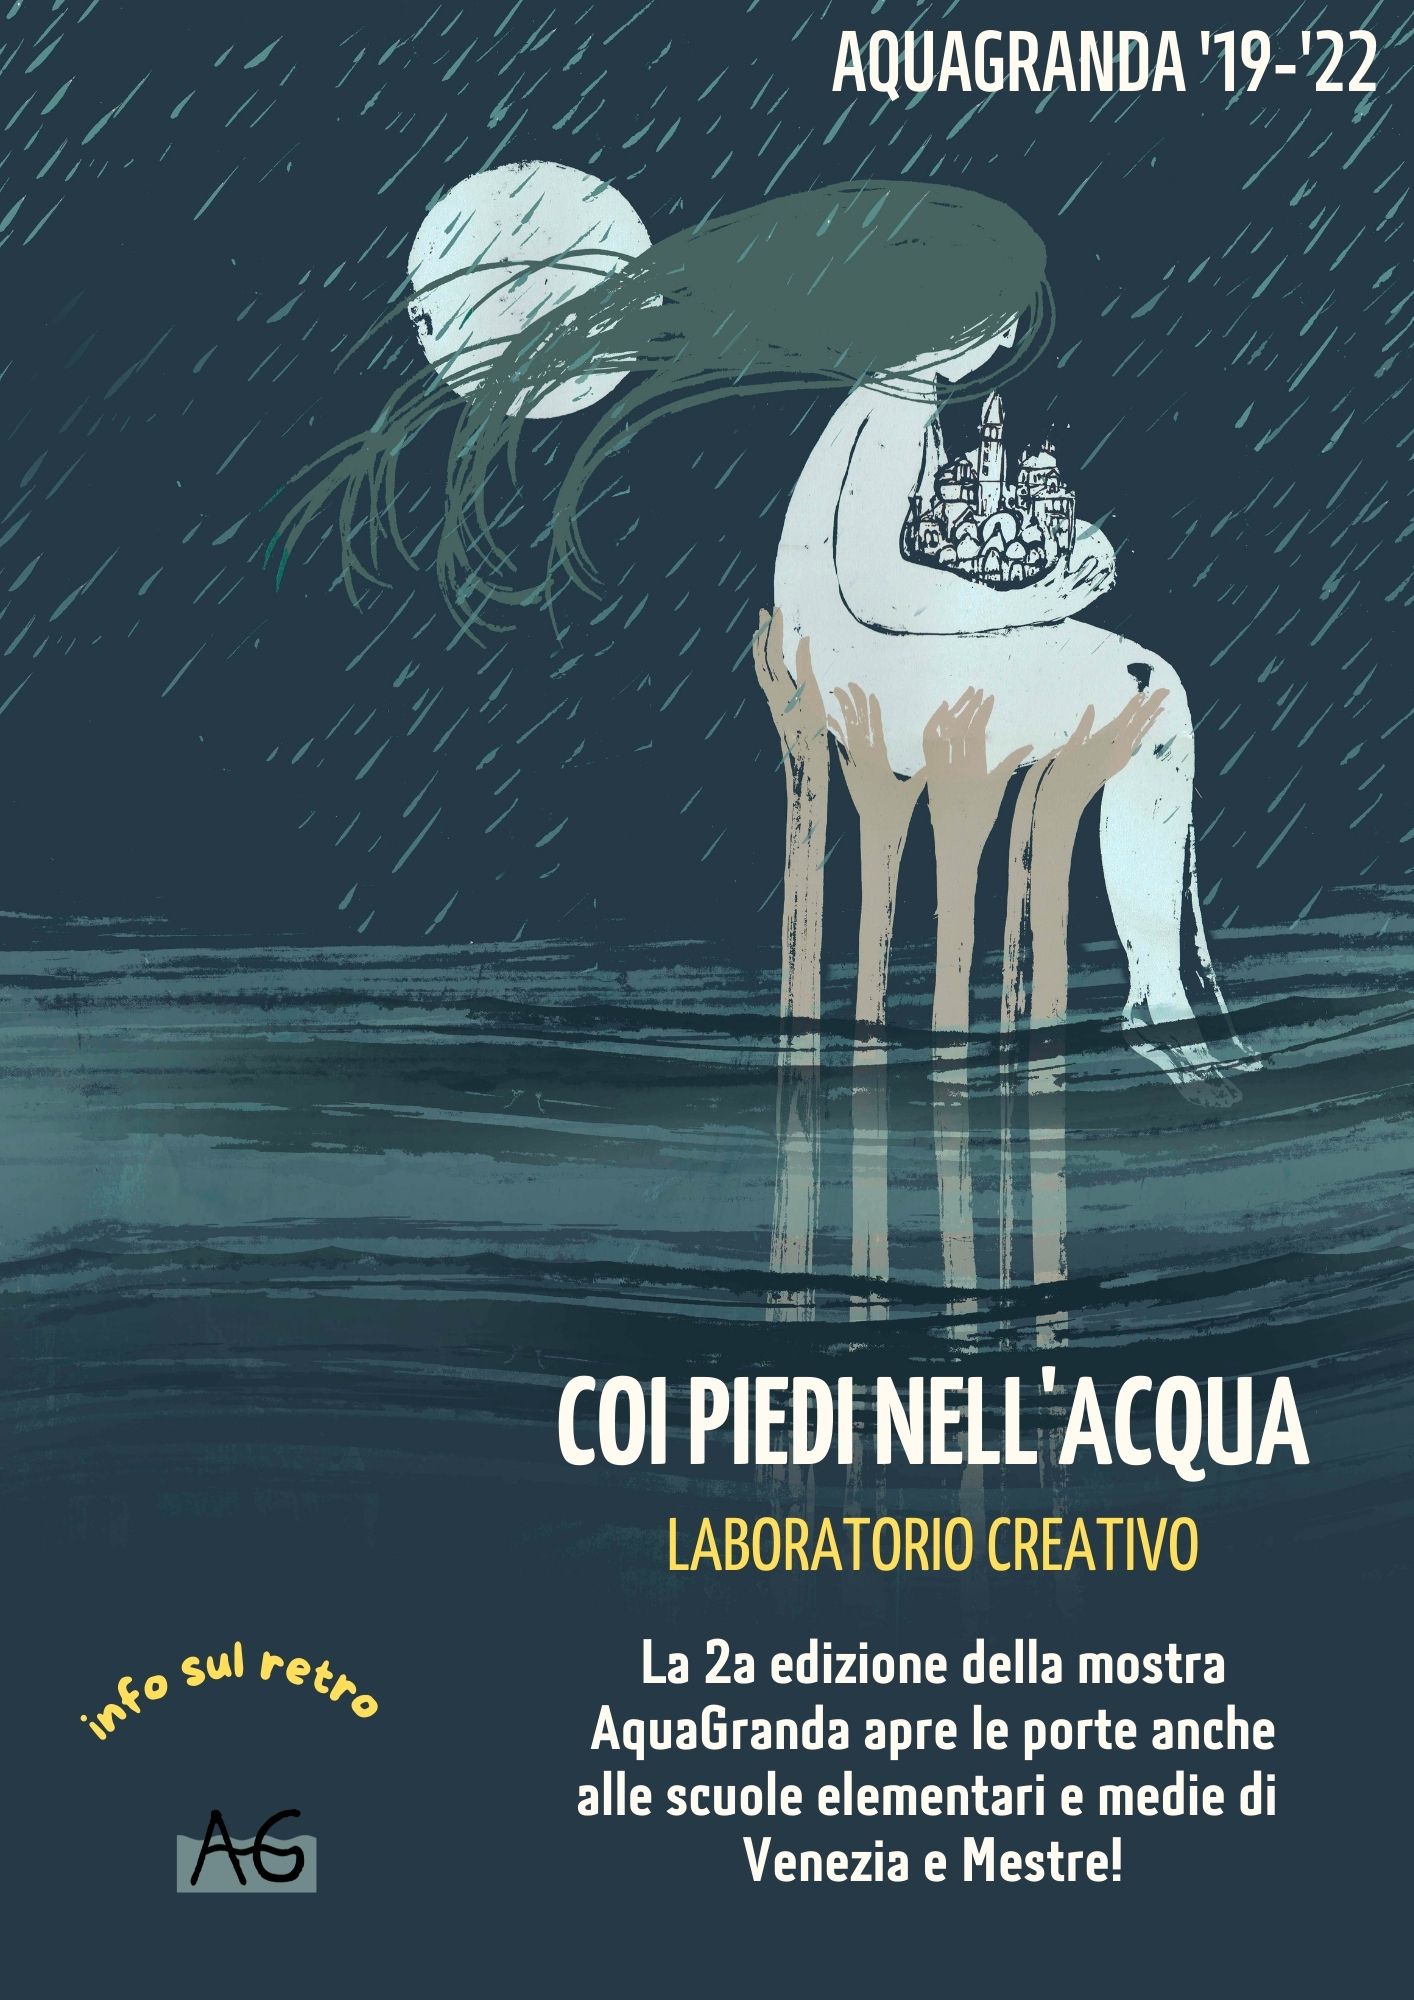 COI PIEDI NELL’ACQUA | Tell us about the high tide through your words and images